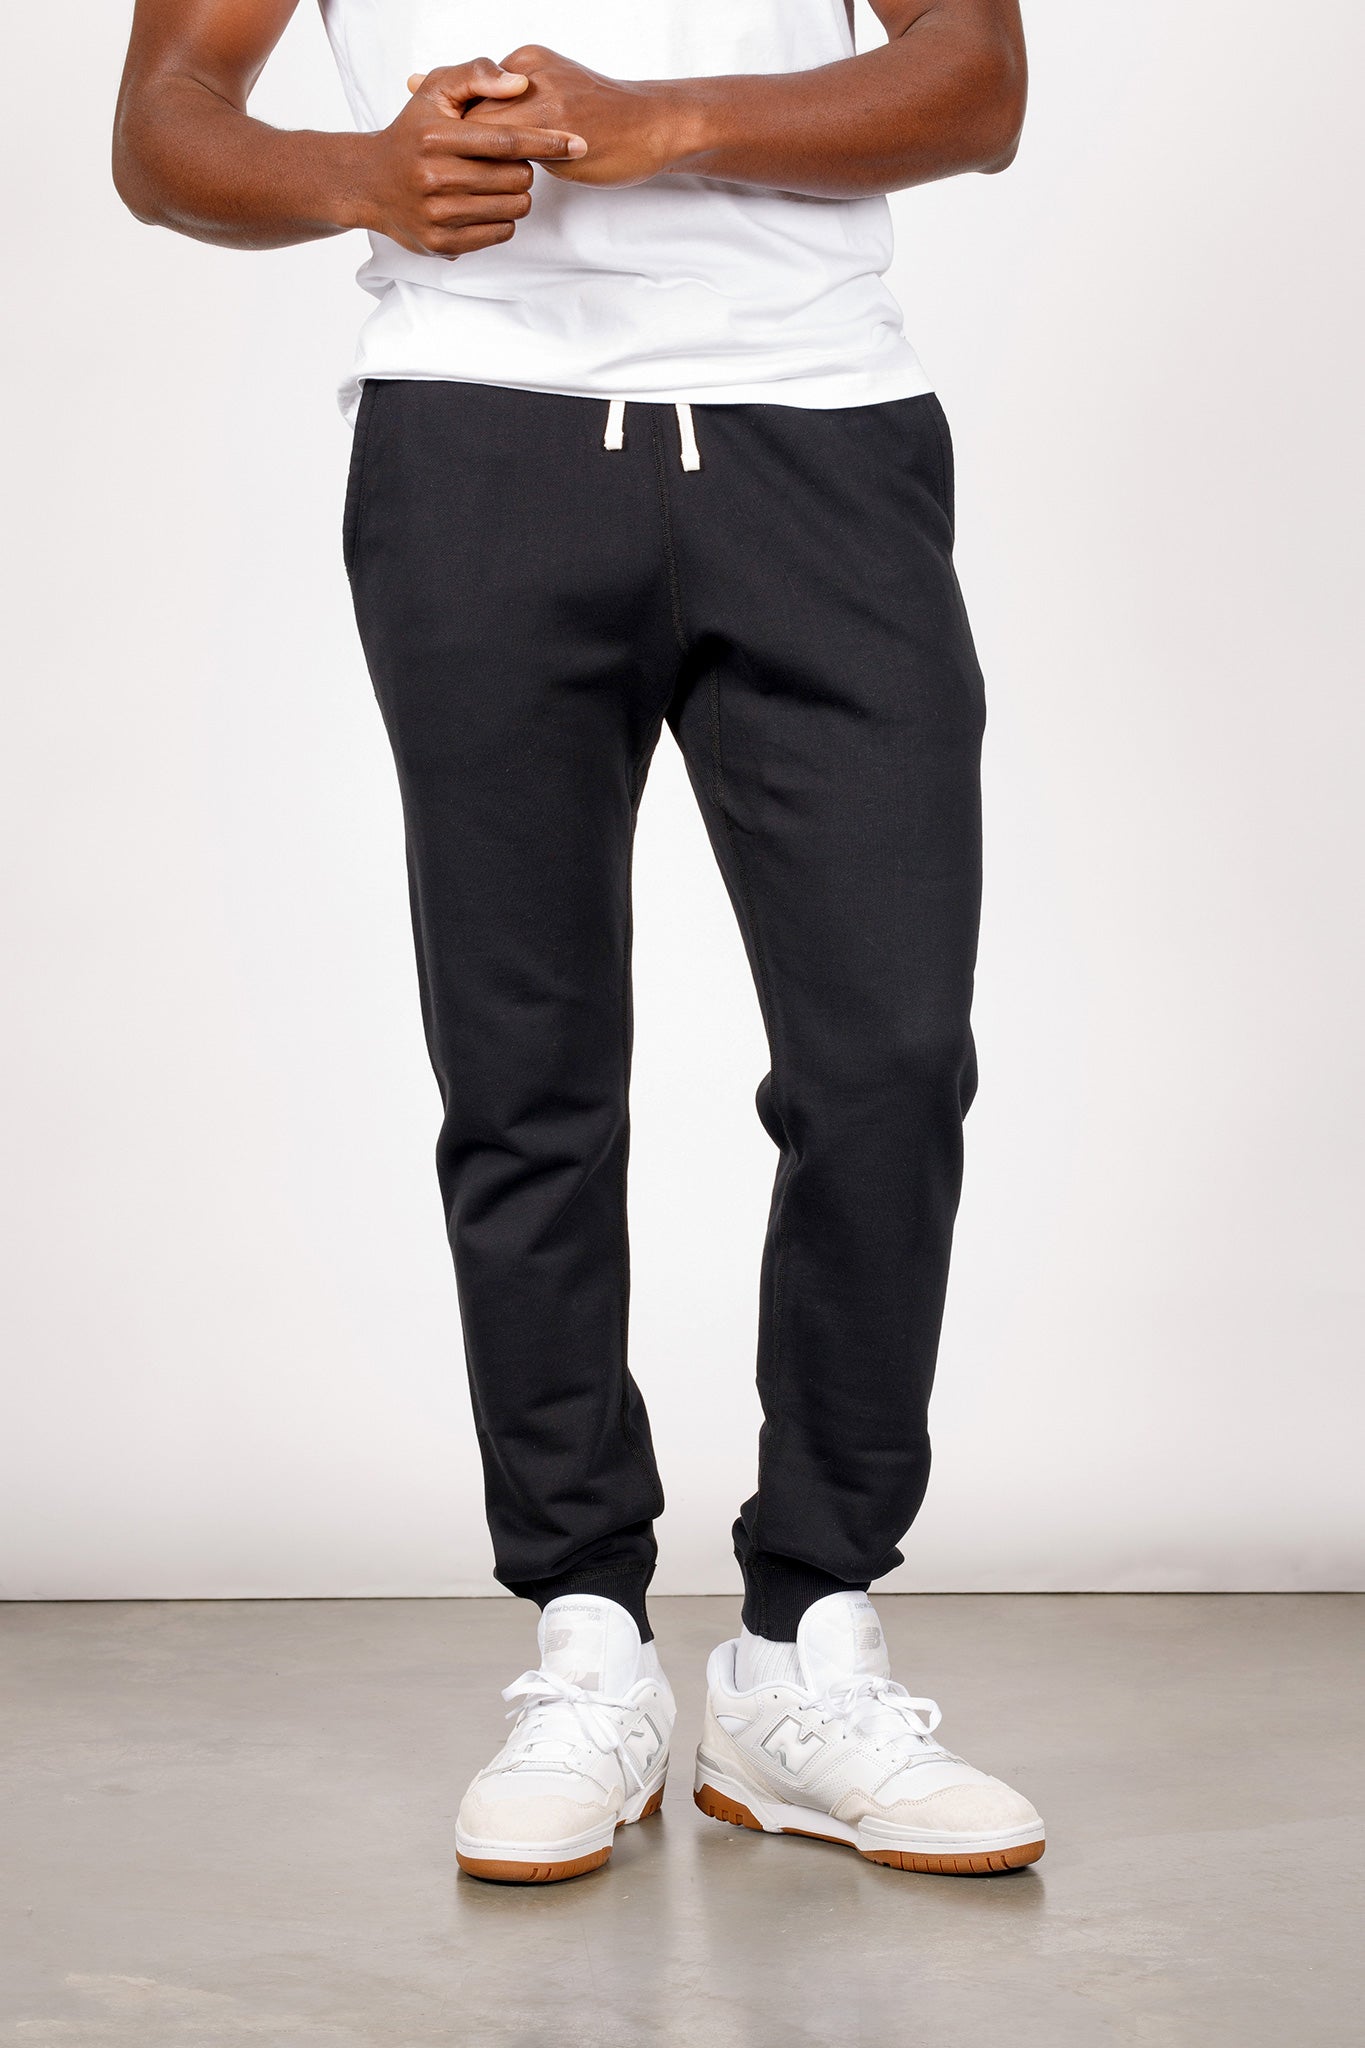 Midweight Terry Slim Sweatpant Pants Reigning Champ   